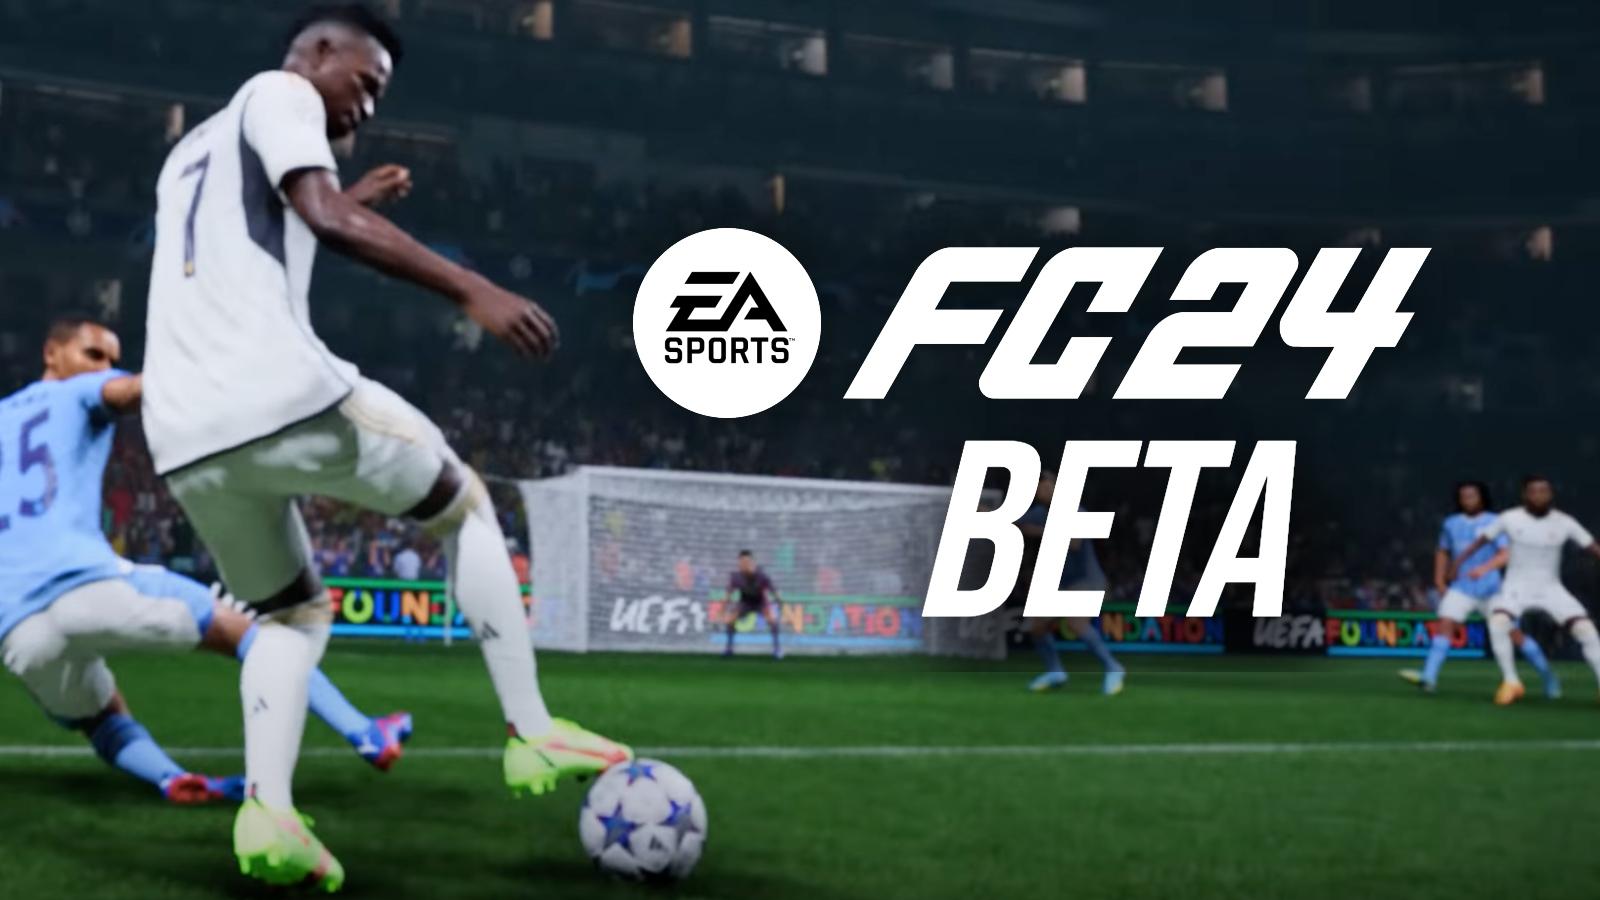 screenshot of Vini Jr in EA SPORTS FC 24 with a logo and 'Beta' next to it